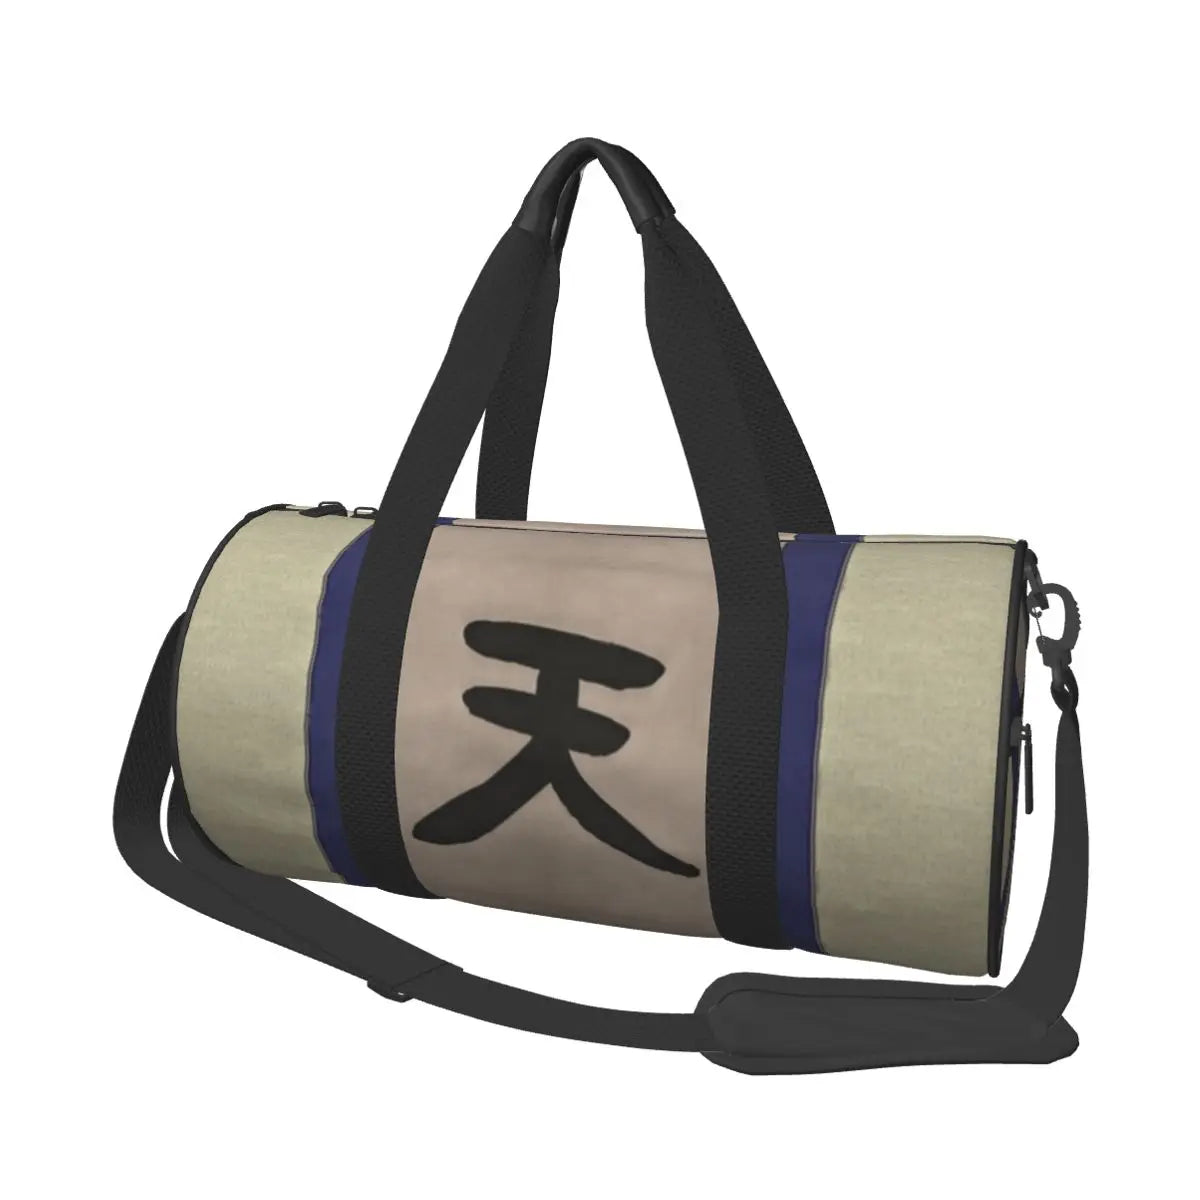 Anime Japanese Scroll Duffle Bag As Picture